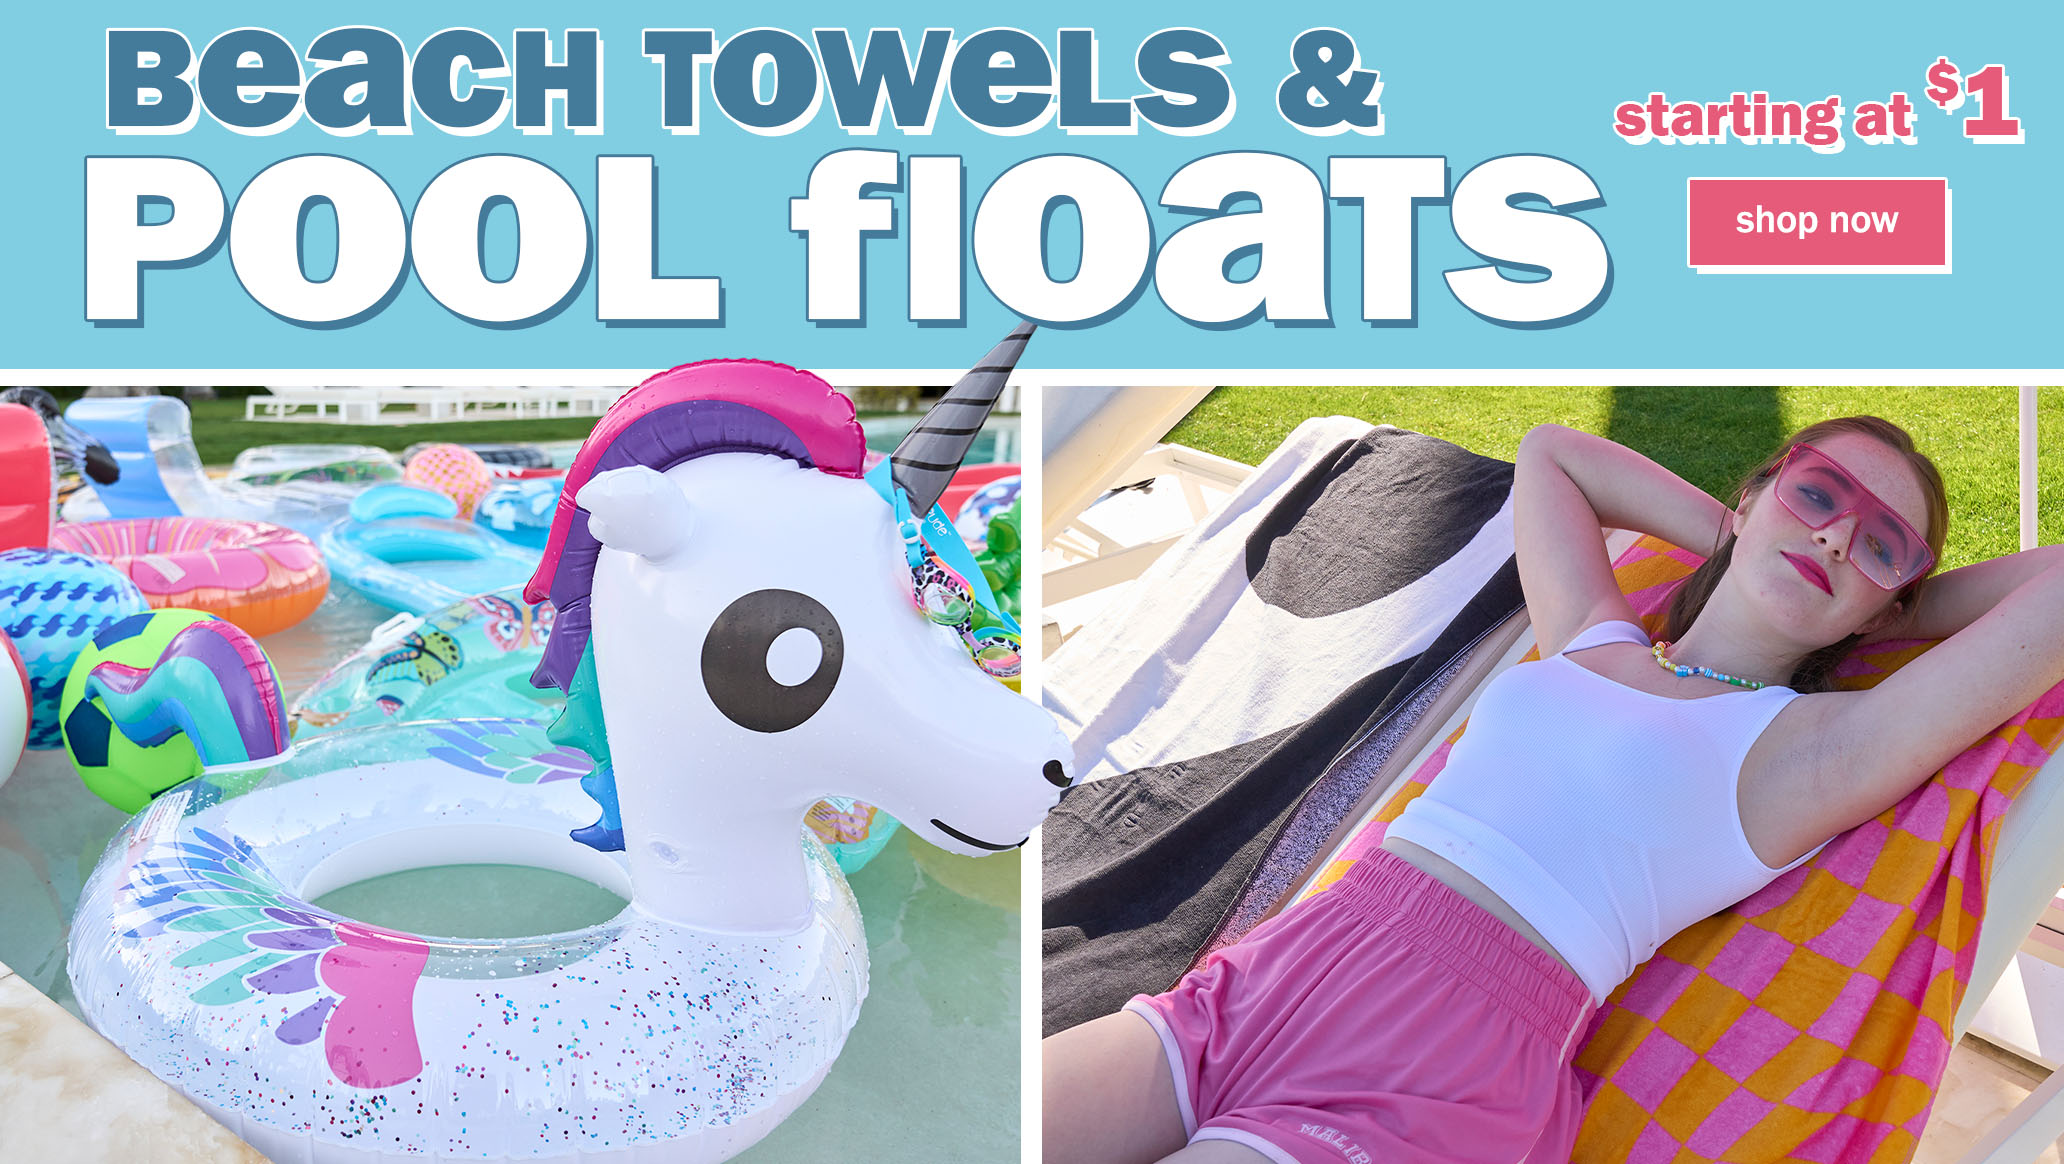 Five Below – Beach Towels & Pool Floats starting at just !